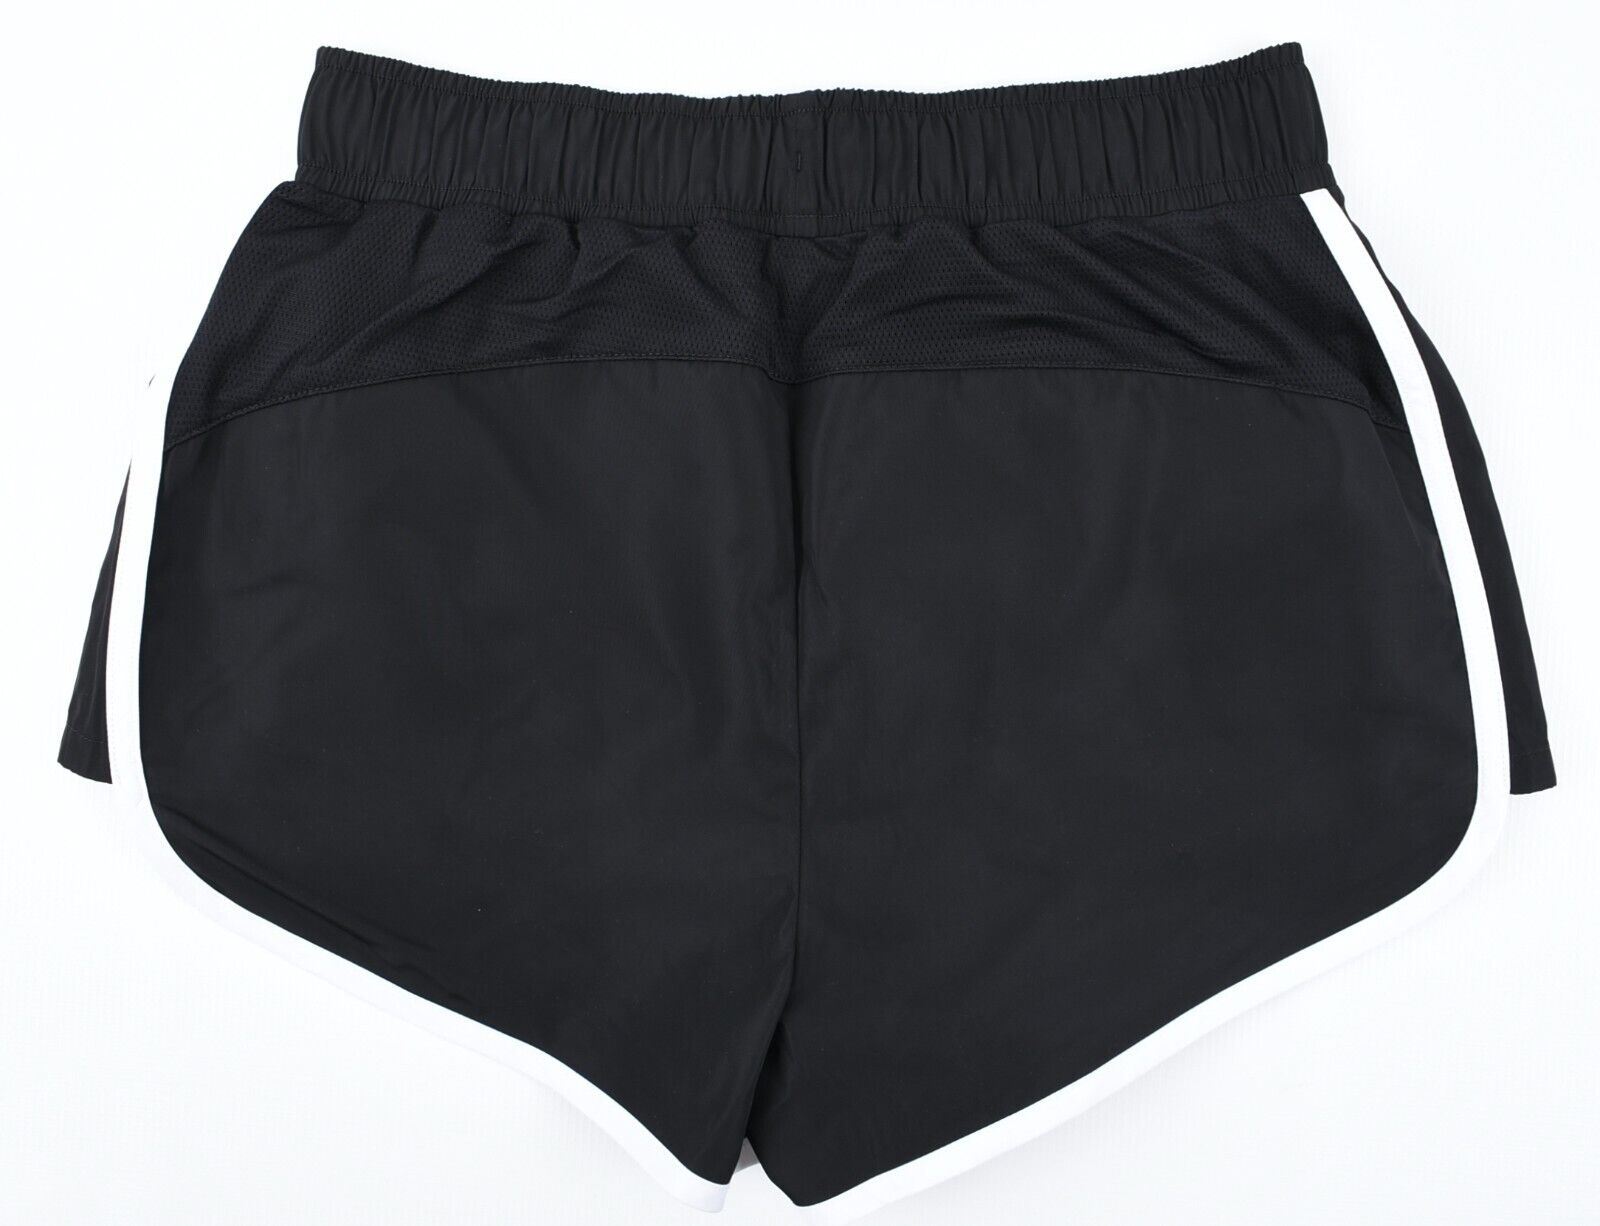 CALVIN KLEIN PERFORMANCE Women's Activewear Shorts with Liner, Black, size XS